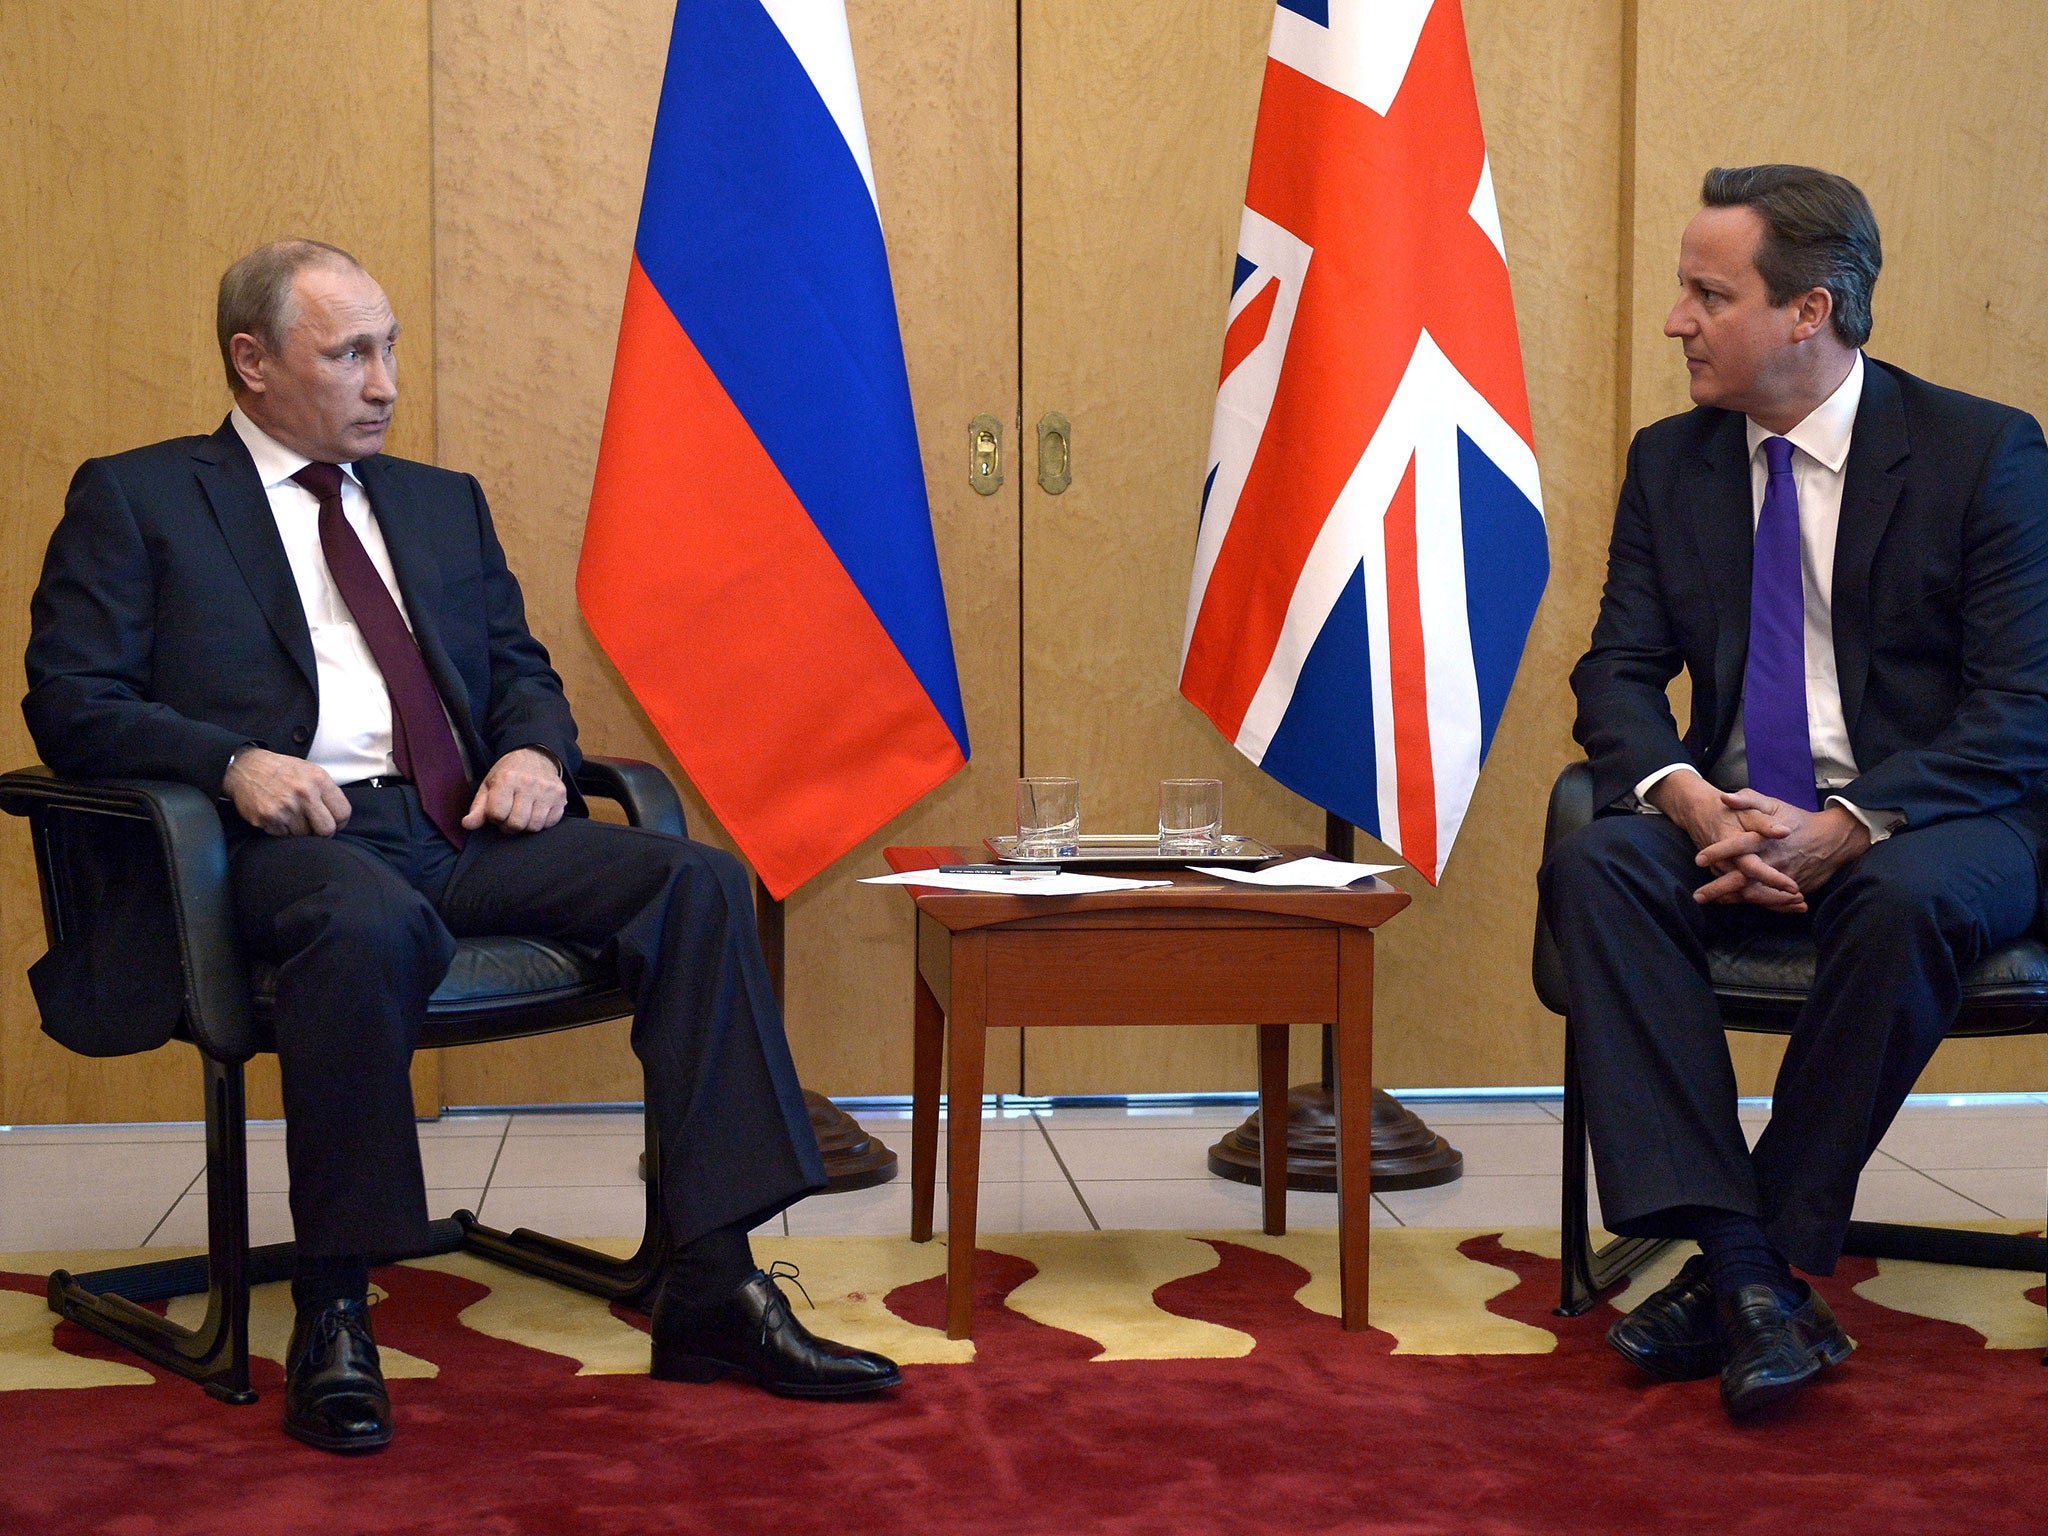 Russia's President Vladimir Putin (L) speaks with Britain's Prime Minister David Cameron (R) as they meet at Charles De Gaulle Airport in Paris on June 5, 2014